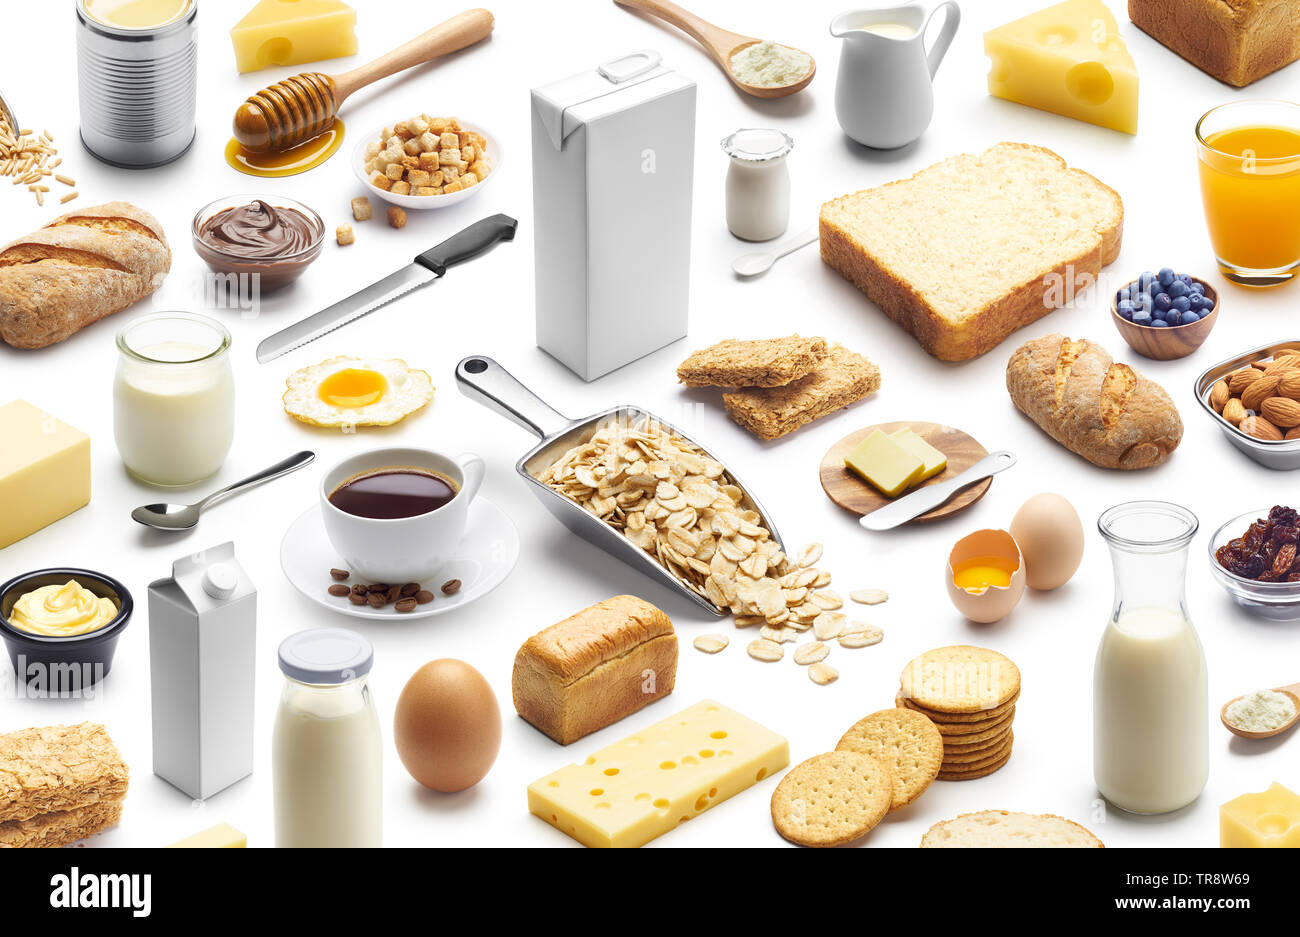 Isometric presentation of healthy breakfast over white background Stock Photo